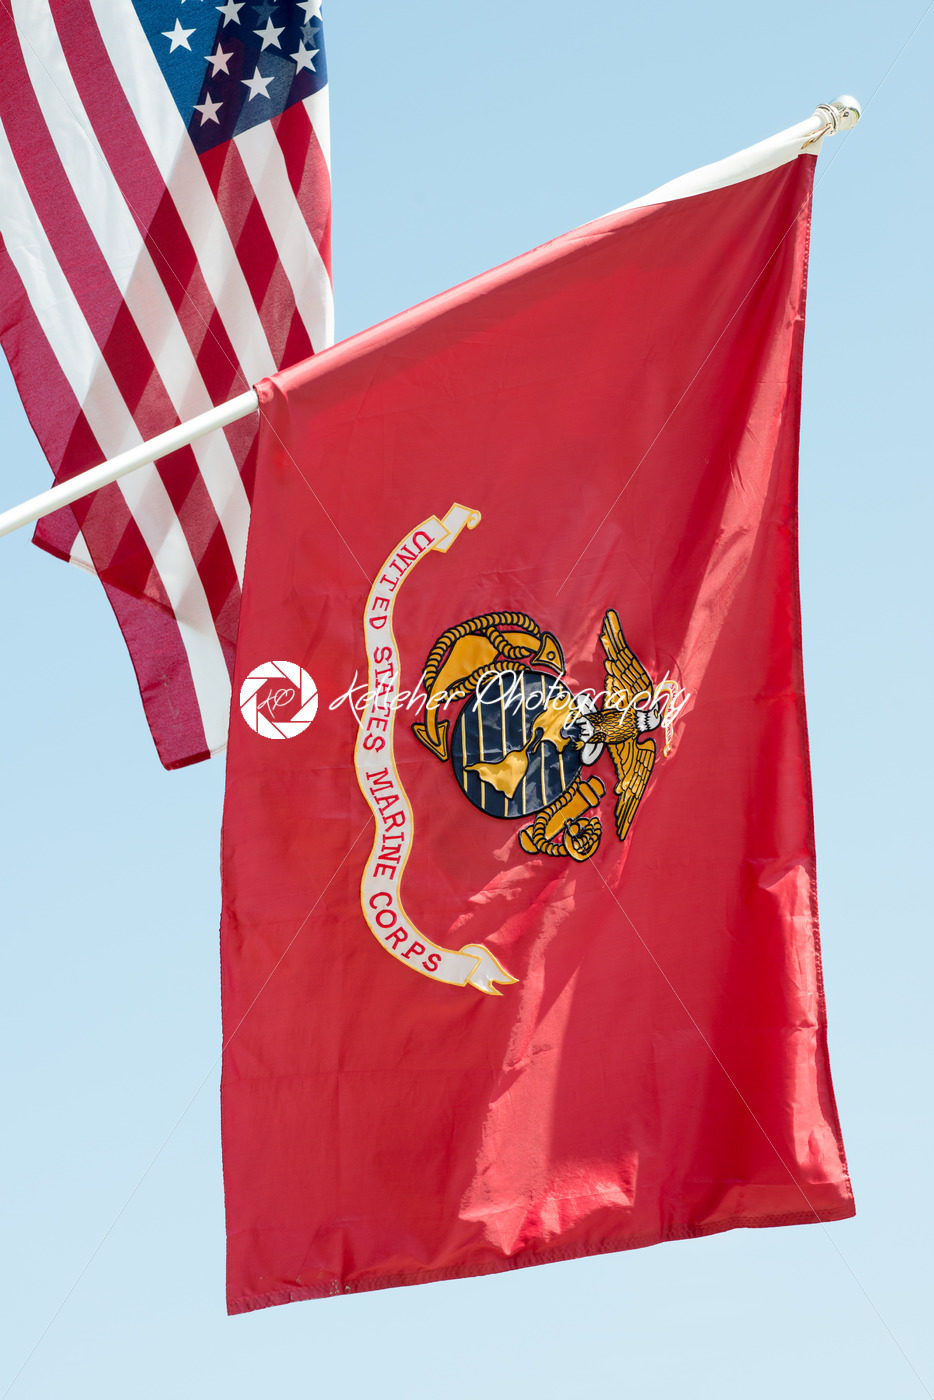 United States Marine Corps flag waving on blue sky background, close up, with American flag in background - Kelleher Photography Store